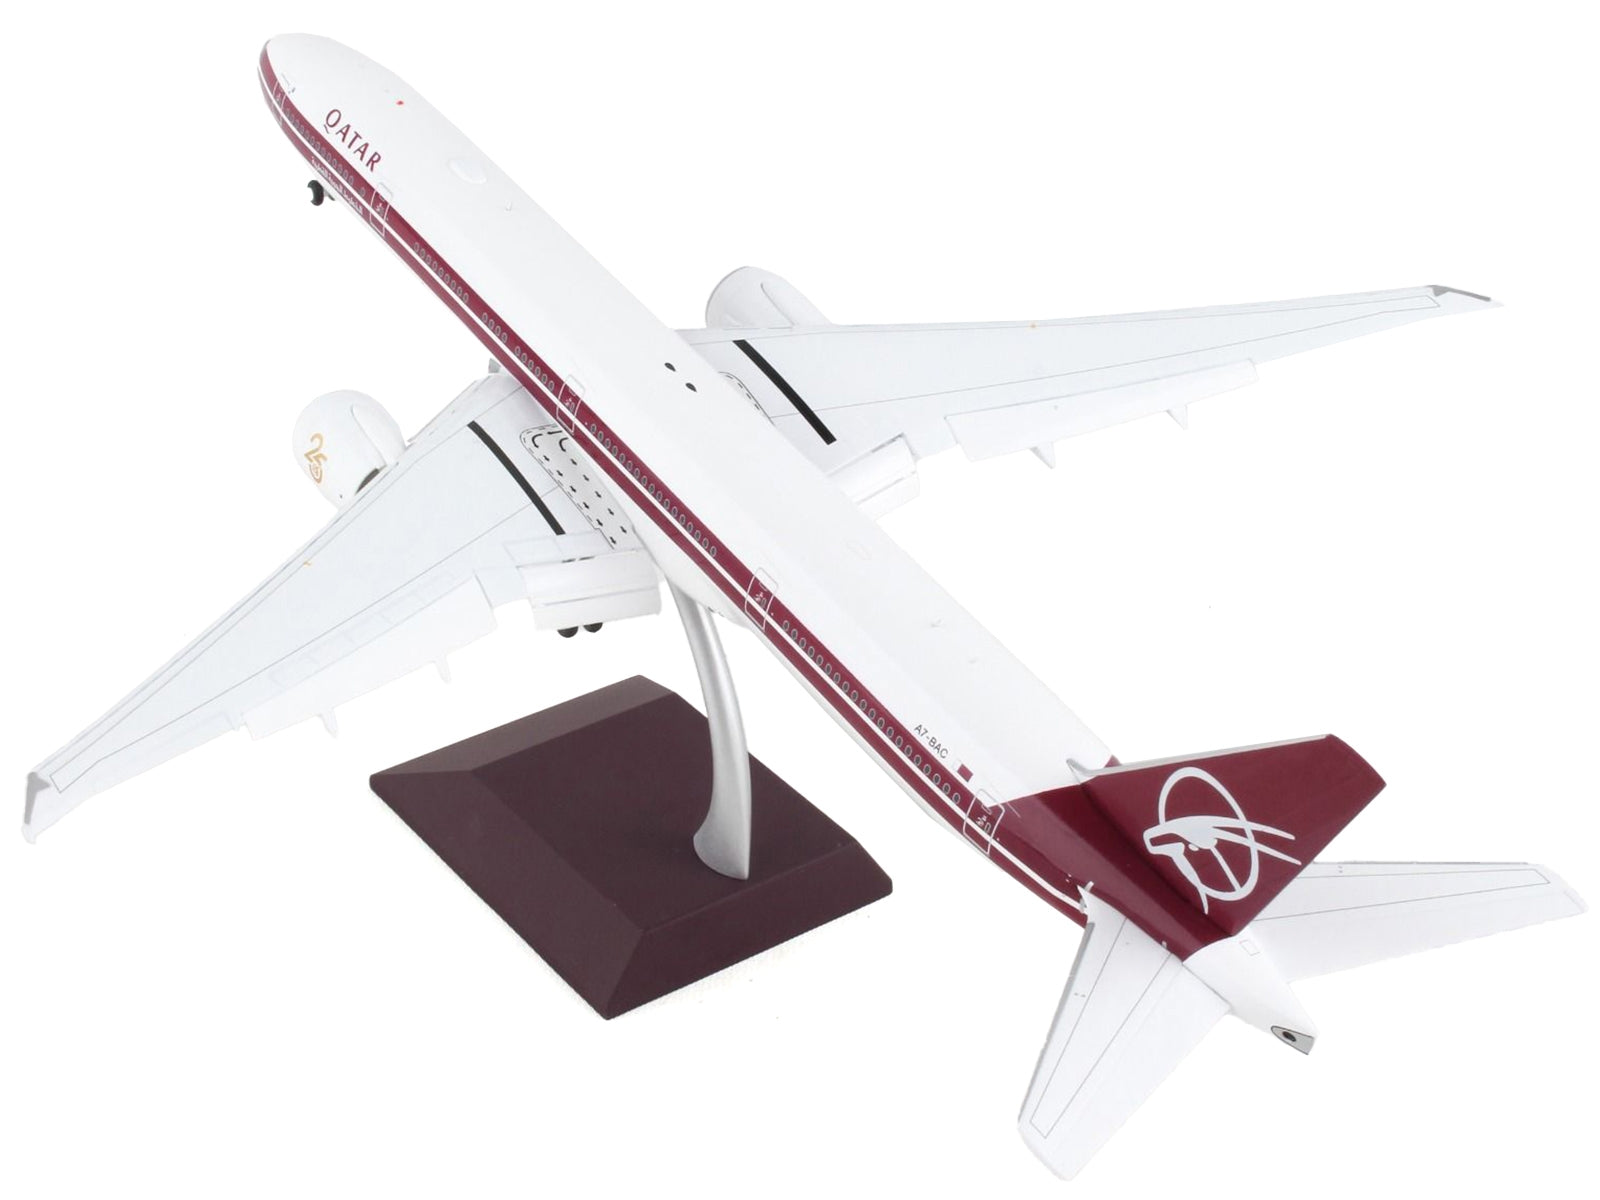 Boeing 777-300ER Commercial Aircraft with Flaps Down "Qatar Airways"